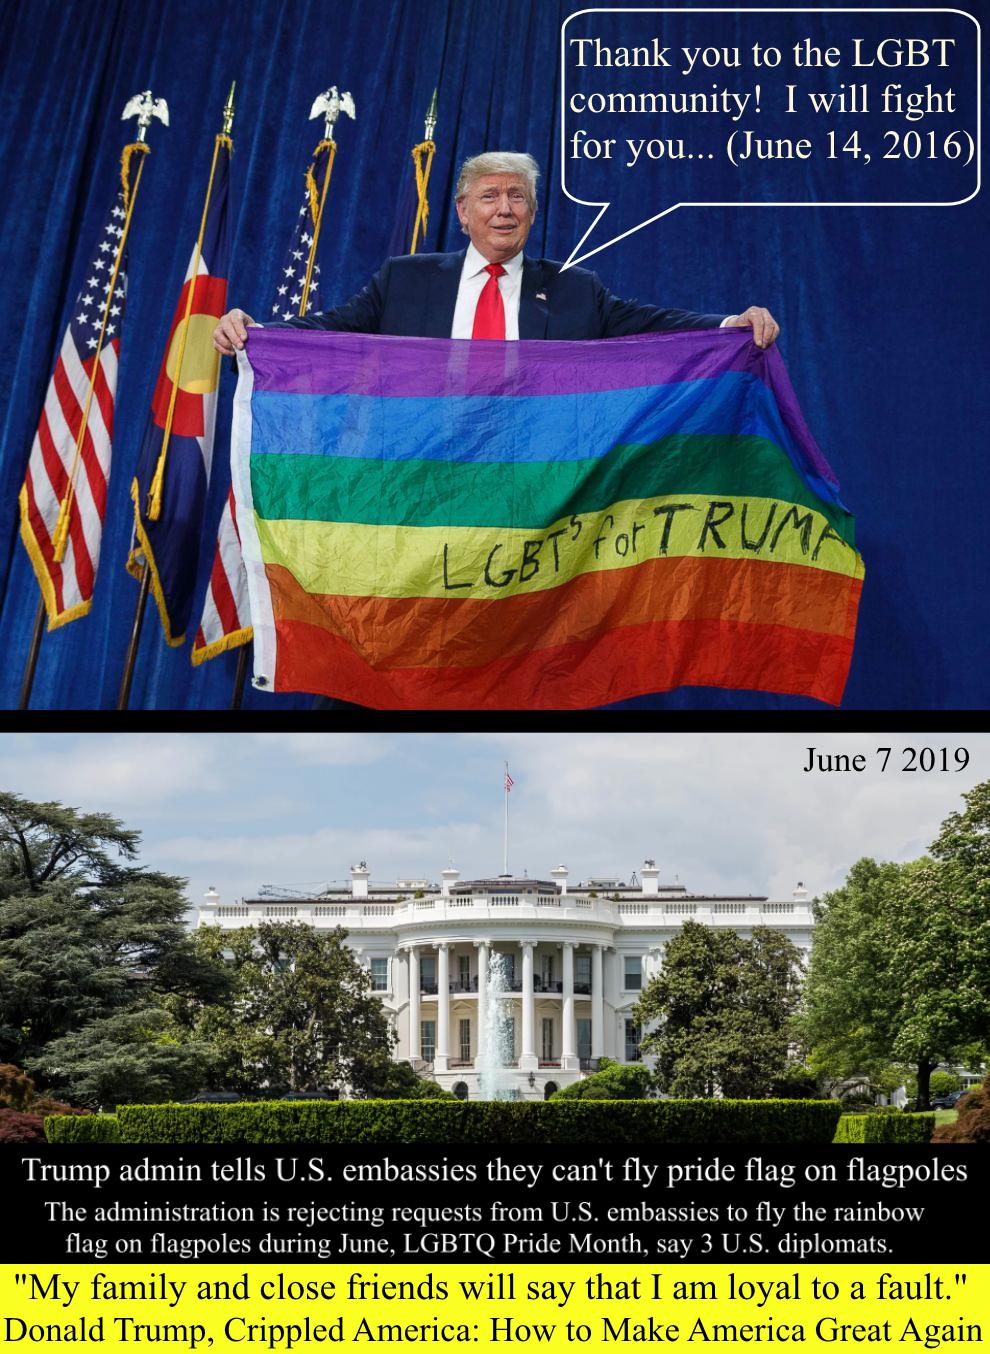 white house - Thank you to the Lgbt community! I will fight for you... Lgbt for Trum. Trump admin tells U.S. embassies they can't fly pride flag on flagpoles The administration is rejecting requests from U.S. embassies to fly the rainbow flag on flagpoles